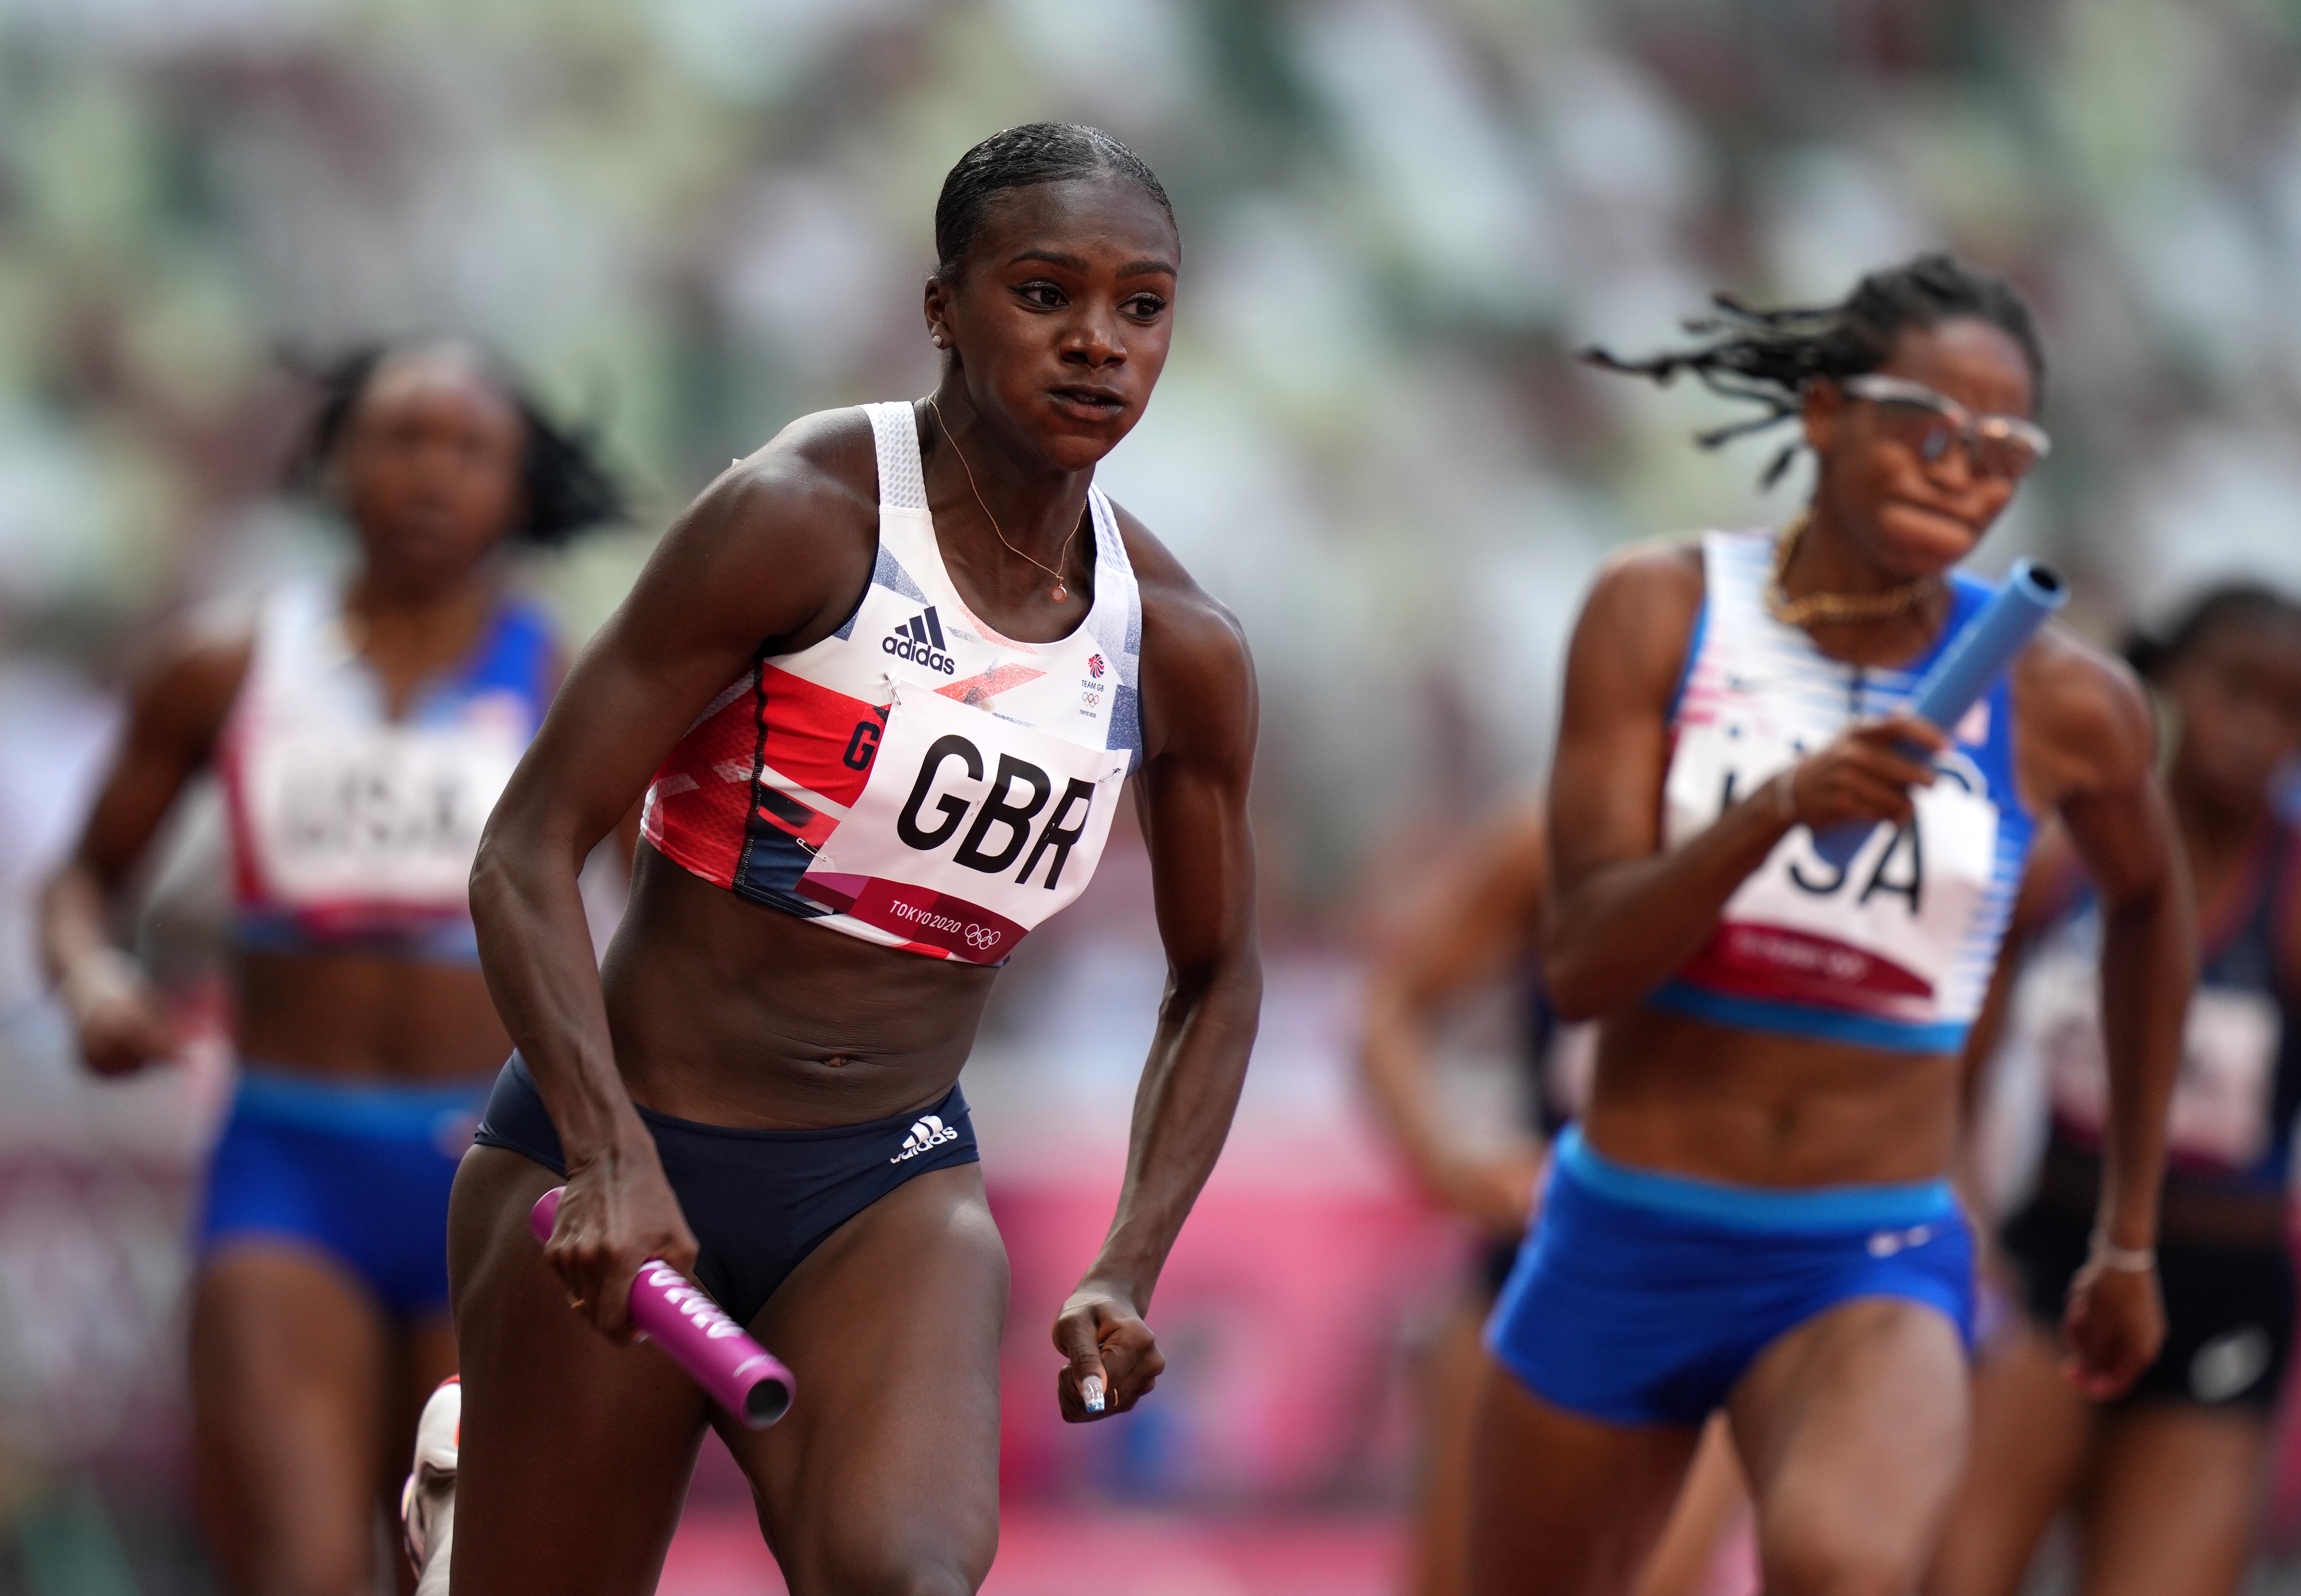 Dina Asher-Smith helped the women’s 4x100m relay squad to the final. (Joe Giddens/PA)